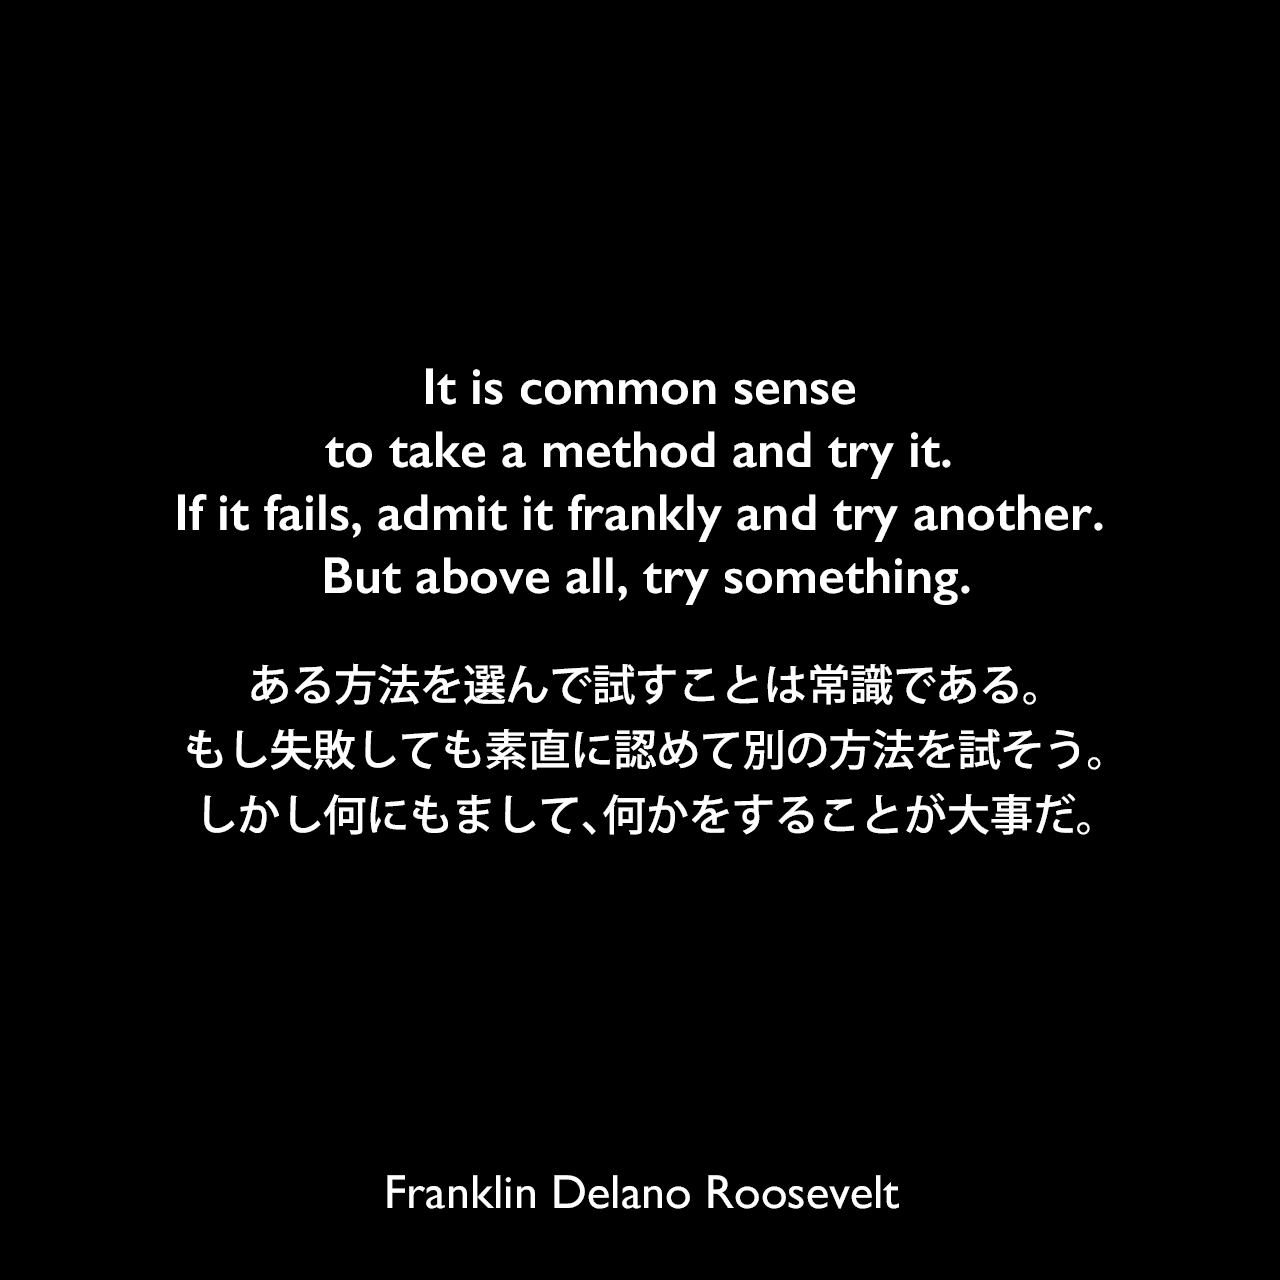 It is common sense to take a method and try it. If it fails, admit it frankly and try another. But above all, try something.ある方法を選んで試すことは常識である。もし失敗しても素直に認めて別の方法を試そう。しかし何にもまして、何かをすることが大事だ。